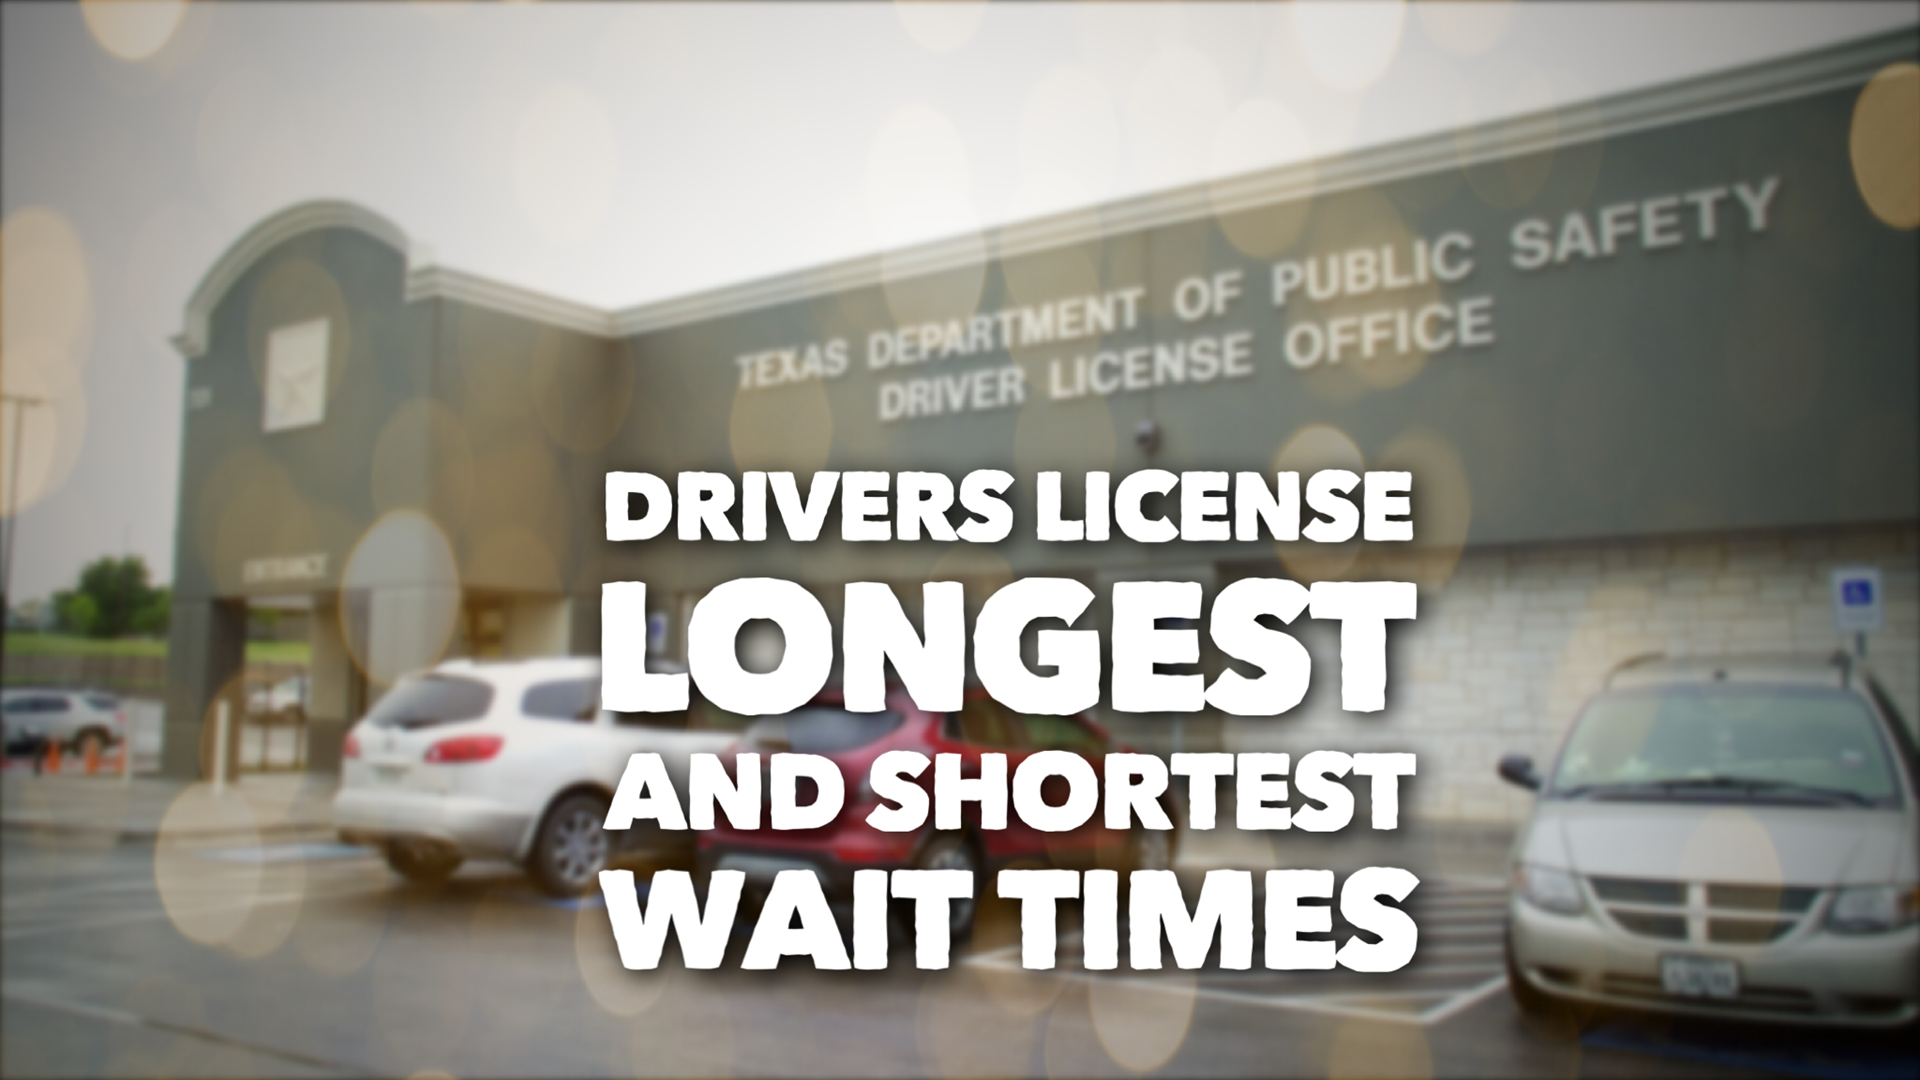 Going to the DMV can take forever. Here's where to go to get a shorter line.